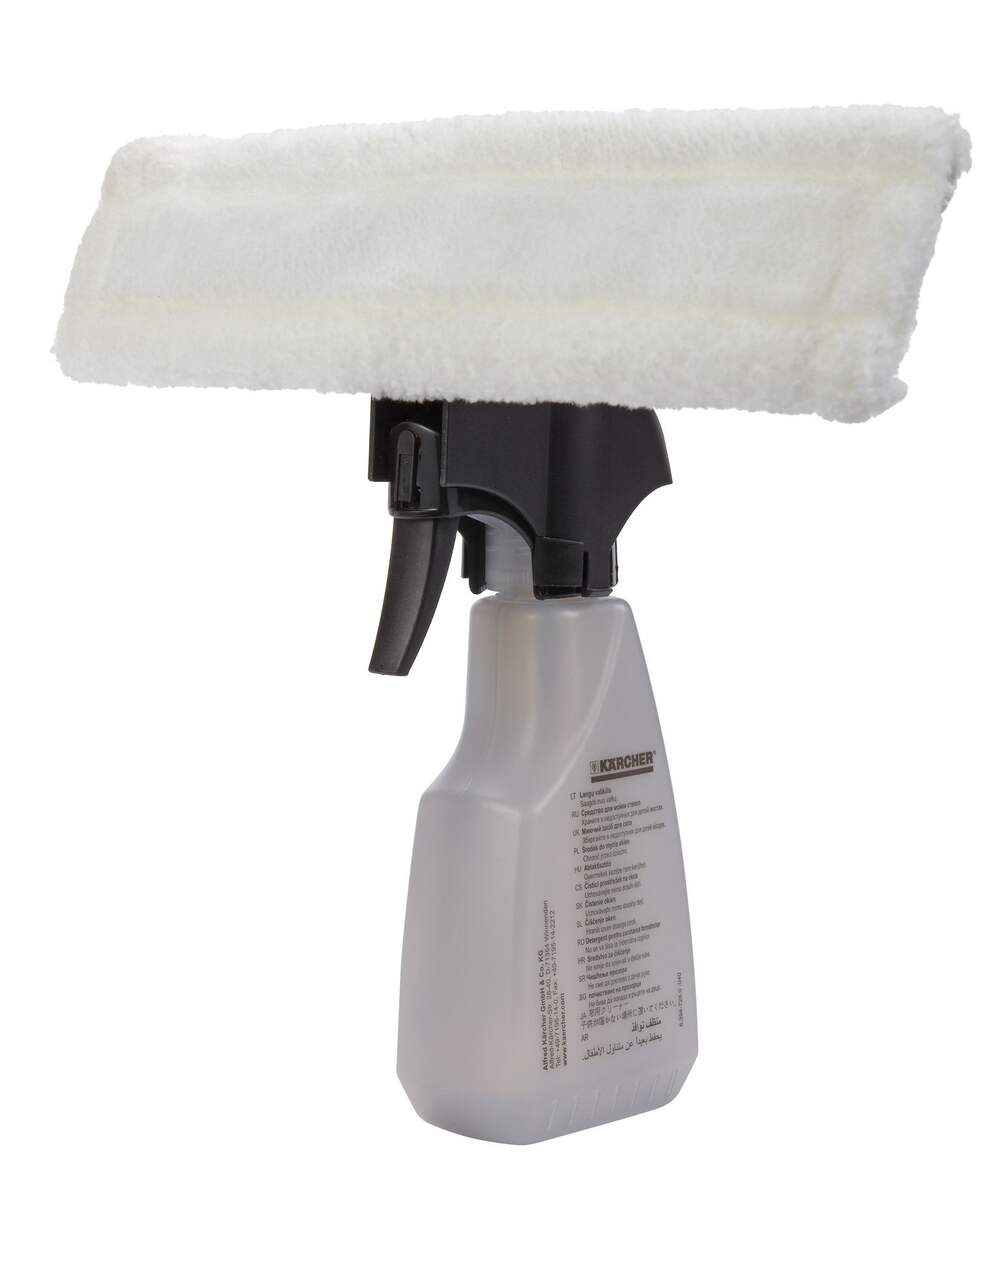 https://media-www.canadiantire.ca/product/living/cleaning/household-cleaning-tools/1420405/karcher-spray-bottle-window-washer-f85f8c05-d3ce-4113-b6f7-871fc4a71237-jpgrendition.jpg?imdensity=1&imwidth=640&impolicy=mZoom